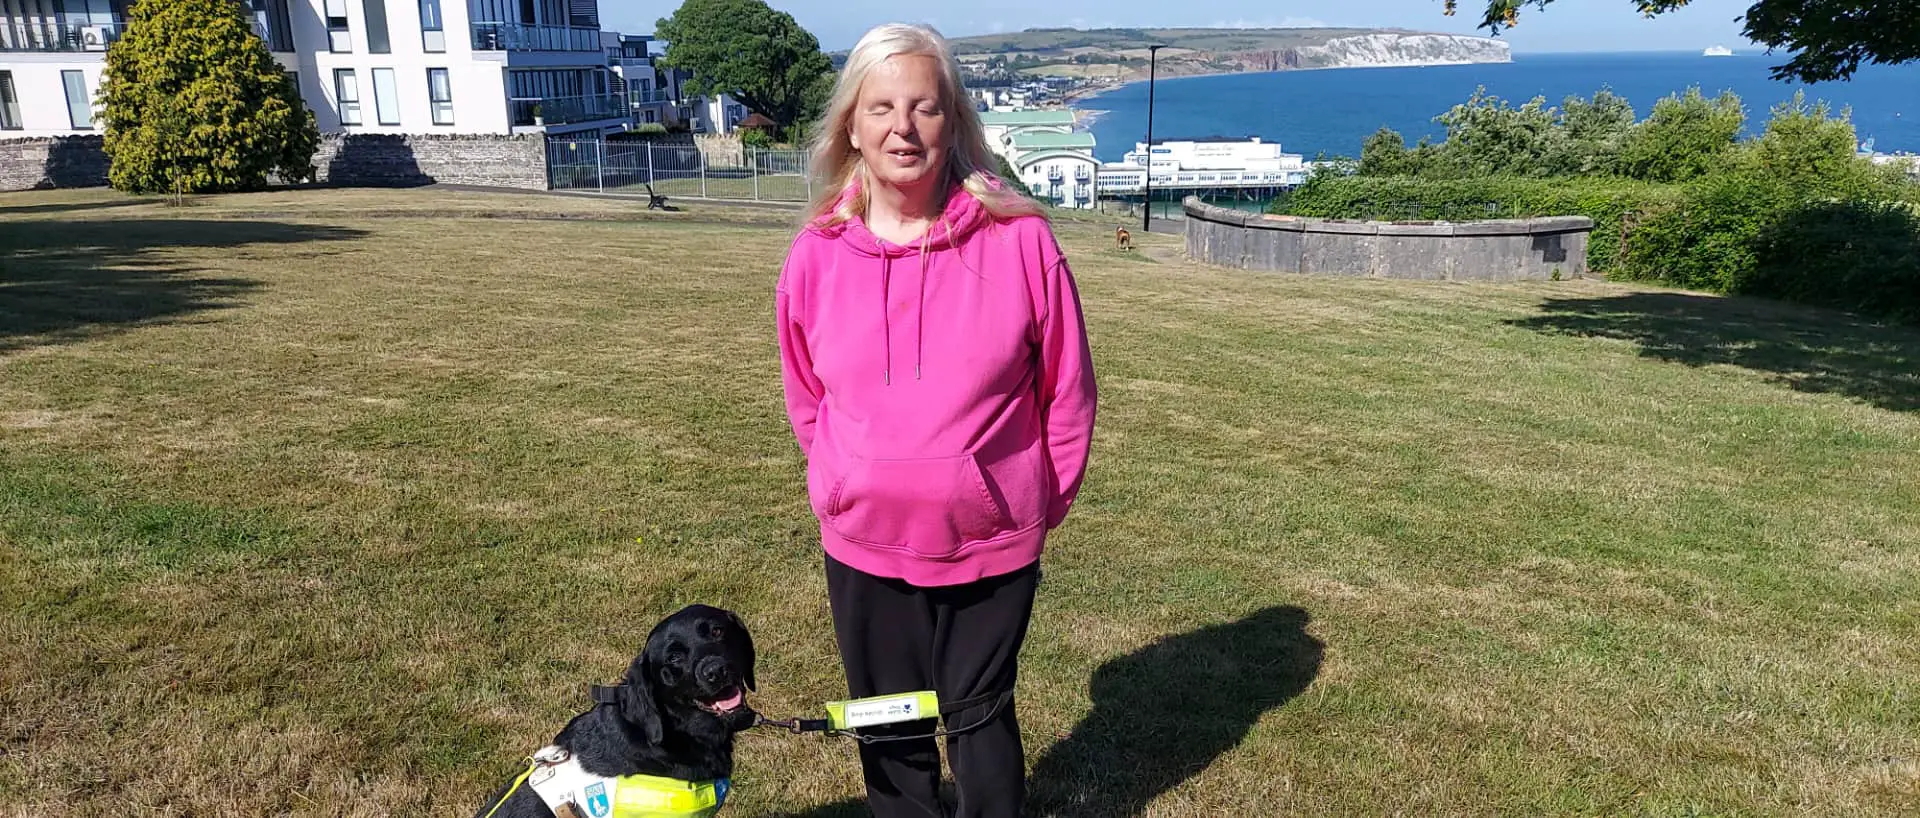 Emily brothers and her guide dog, Truffle, with View of Sandown Bay in the background